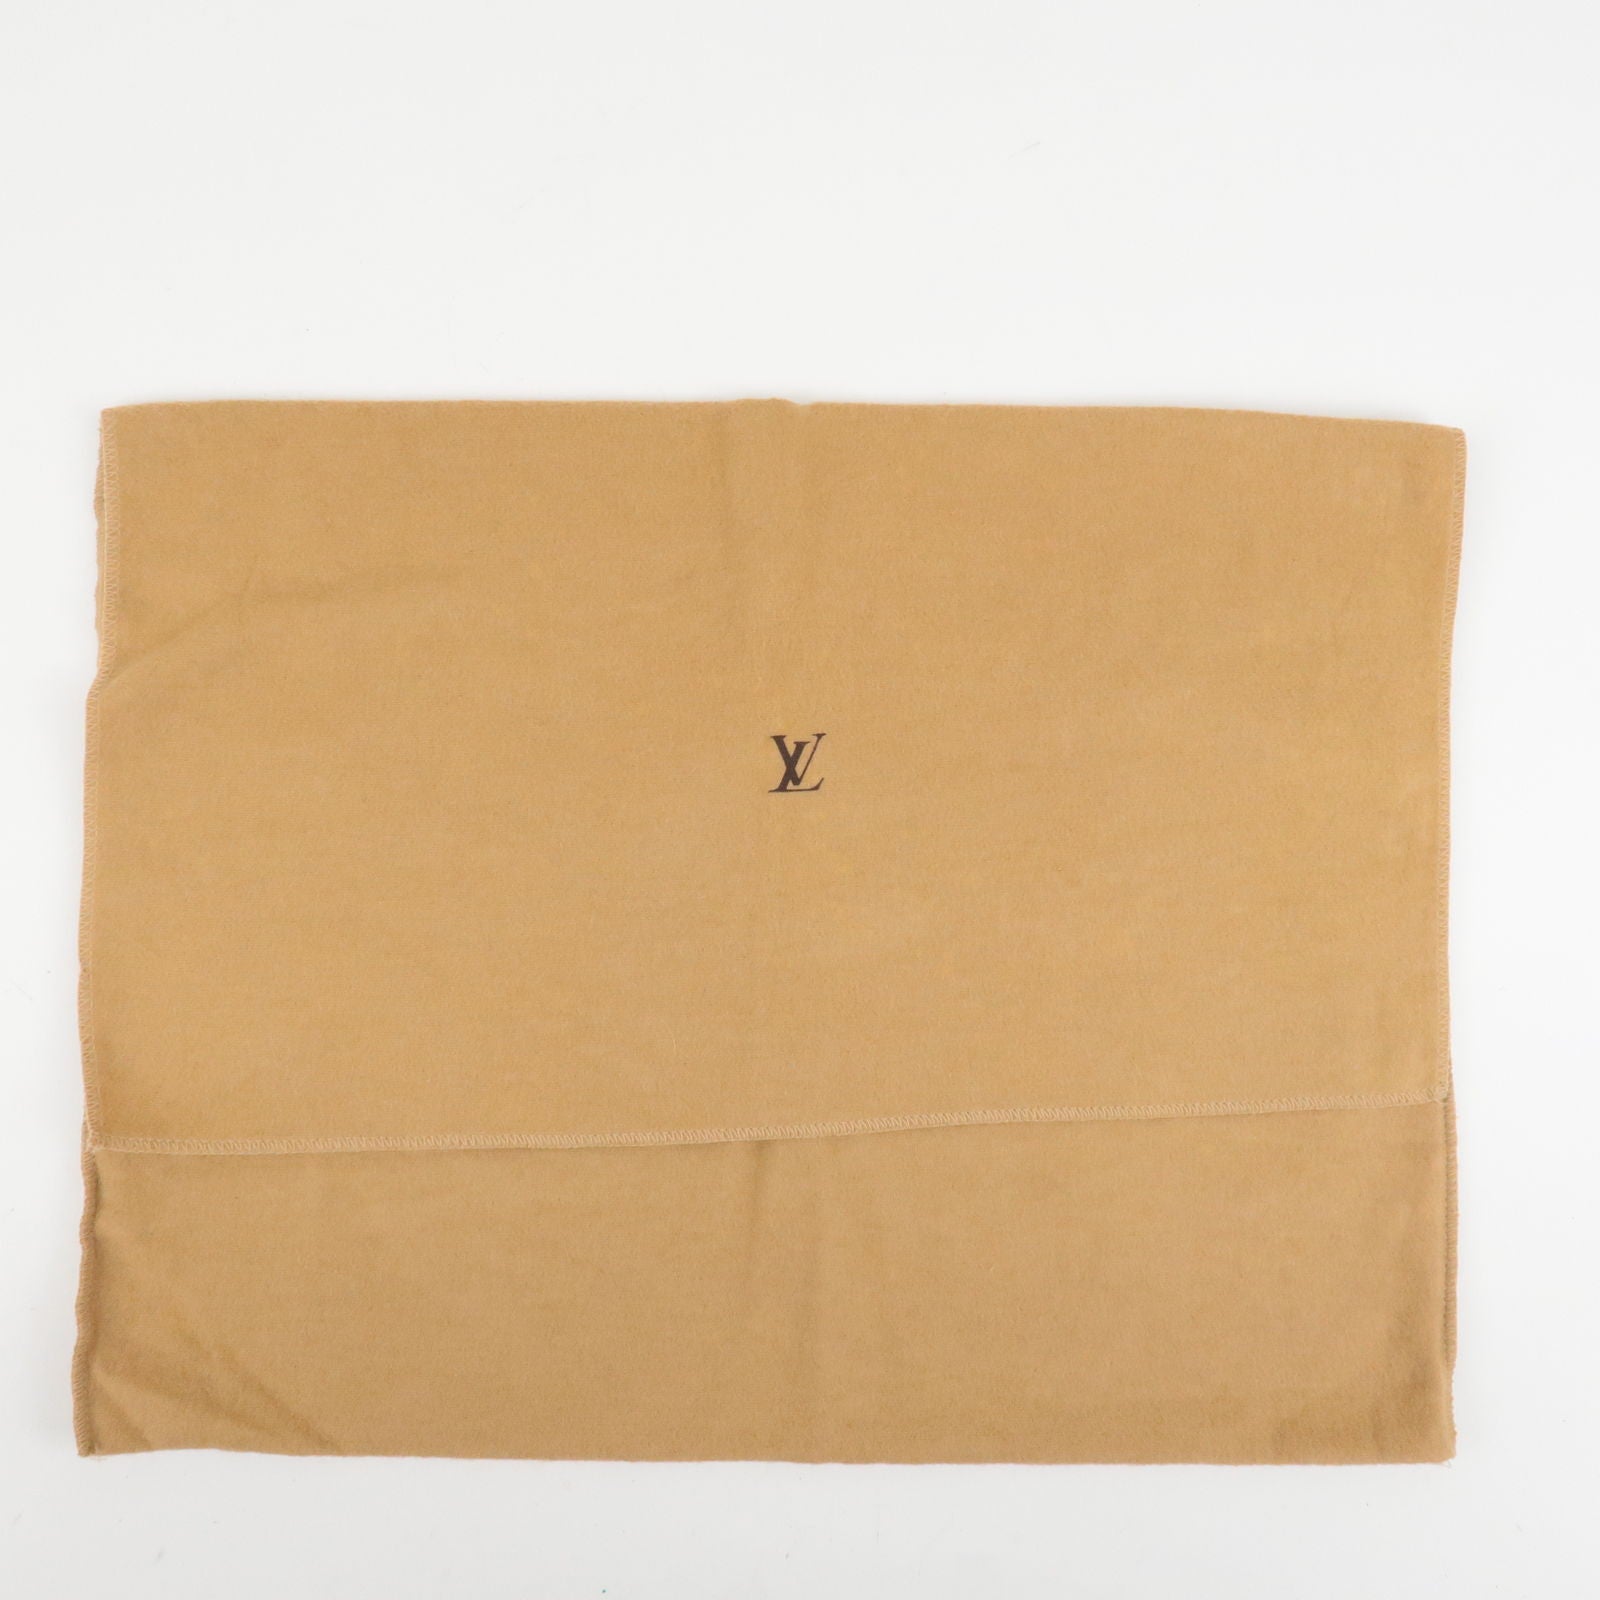 Red Louis Vuitton dust bag - have you seen one before at LV? 